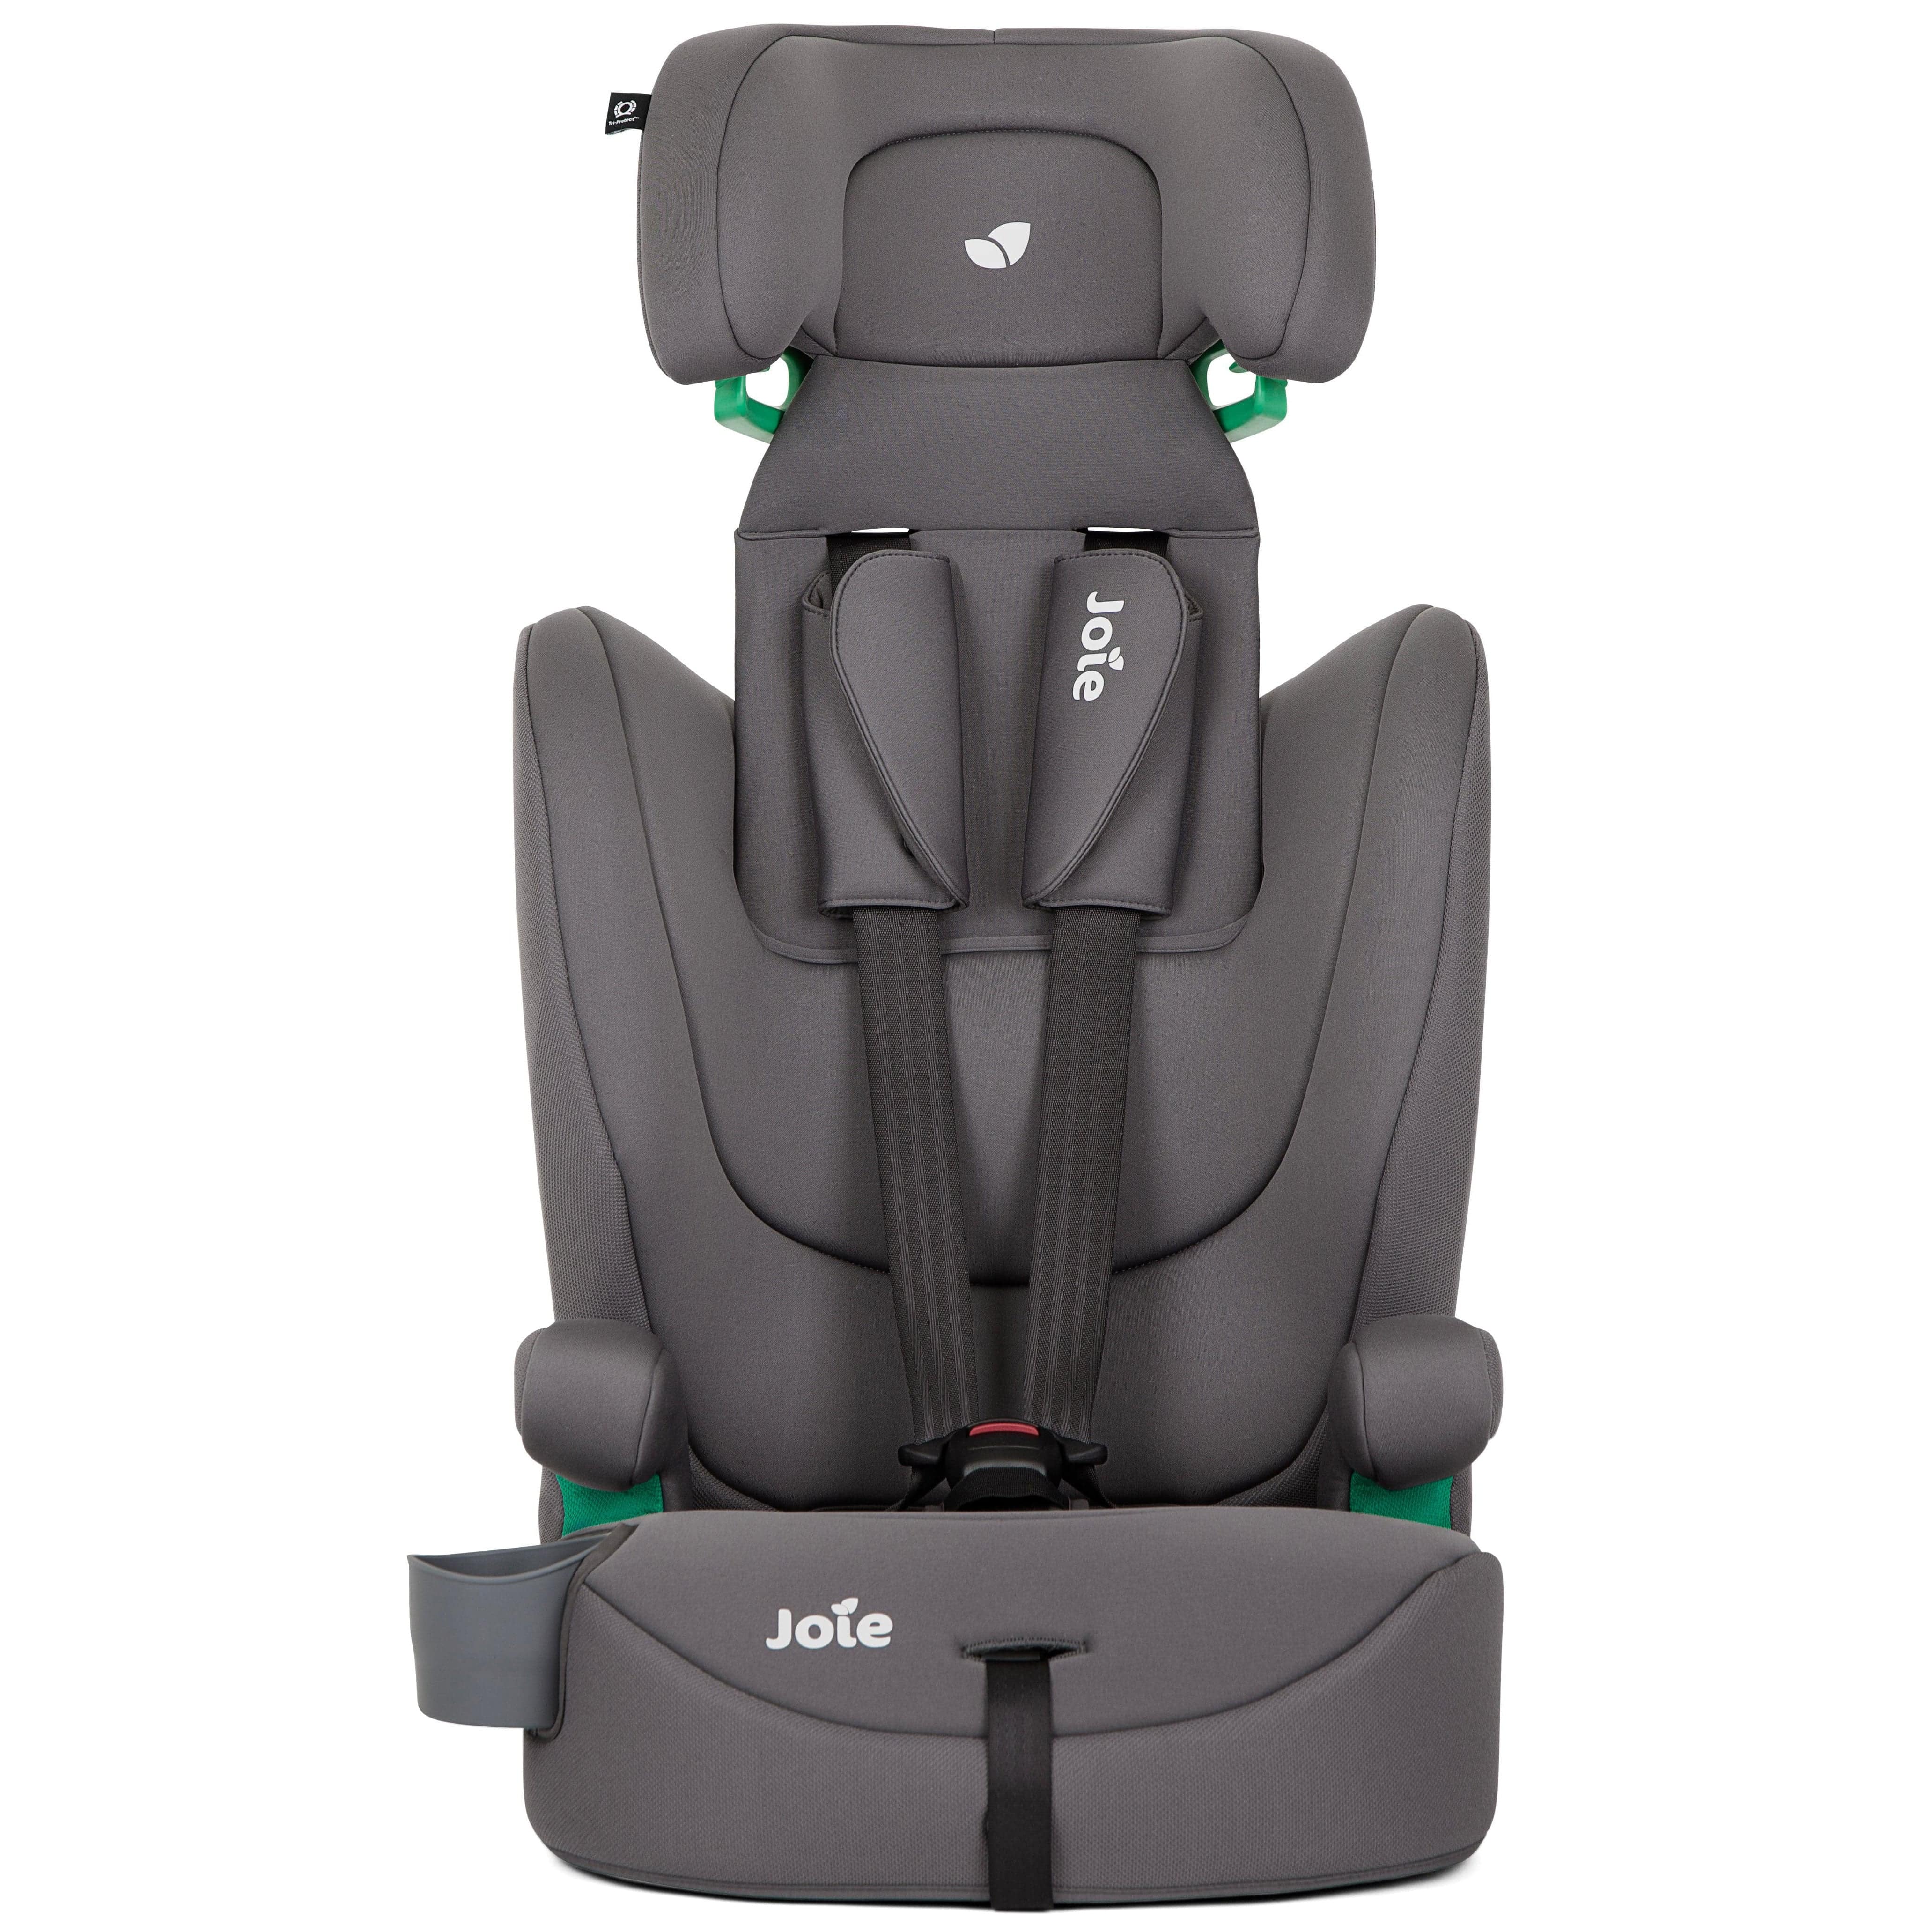 Joie combination car seats Joie Elevate R129 1/2/3 Car Seat - Thunder C2216AATHD000